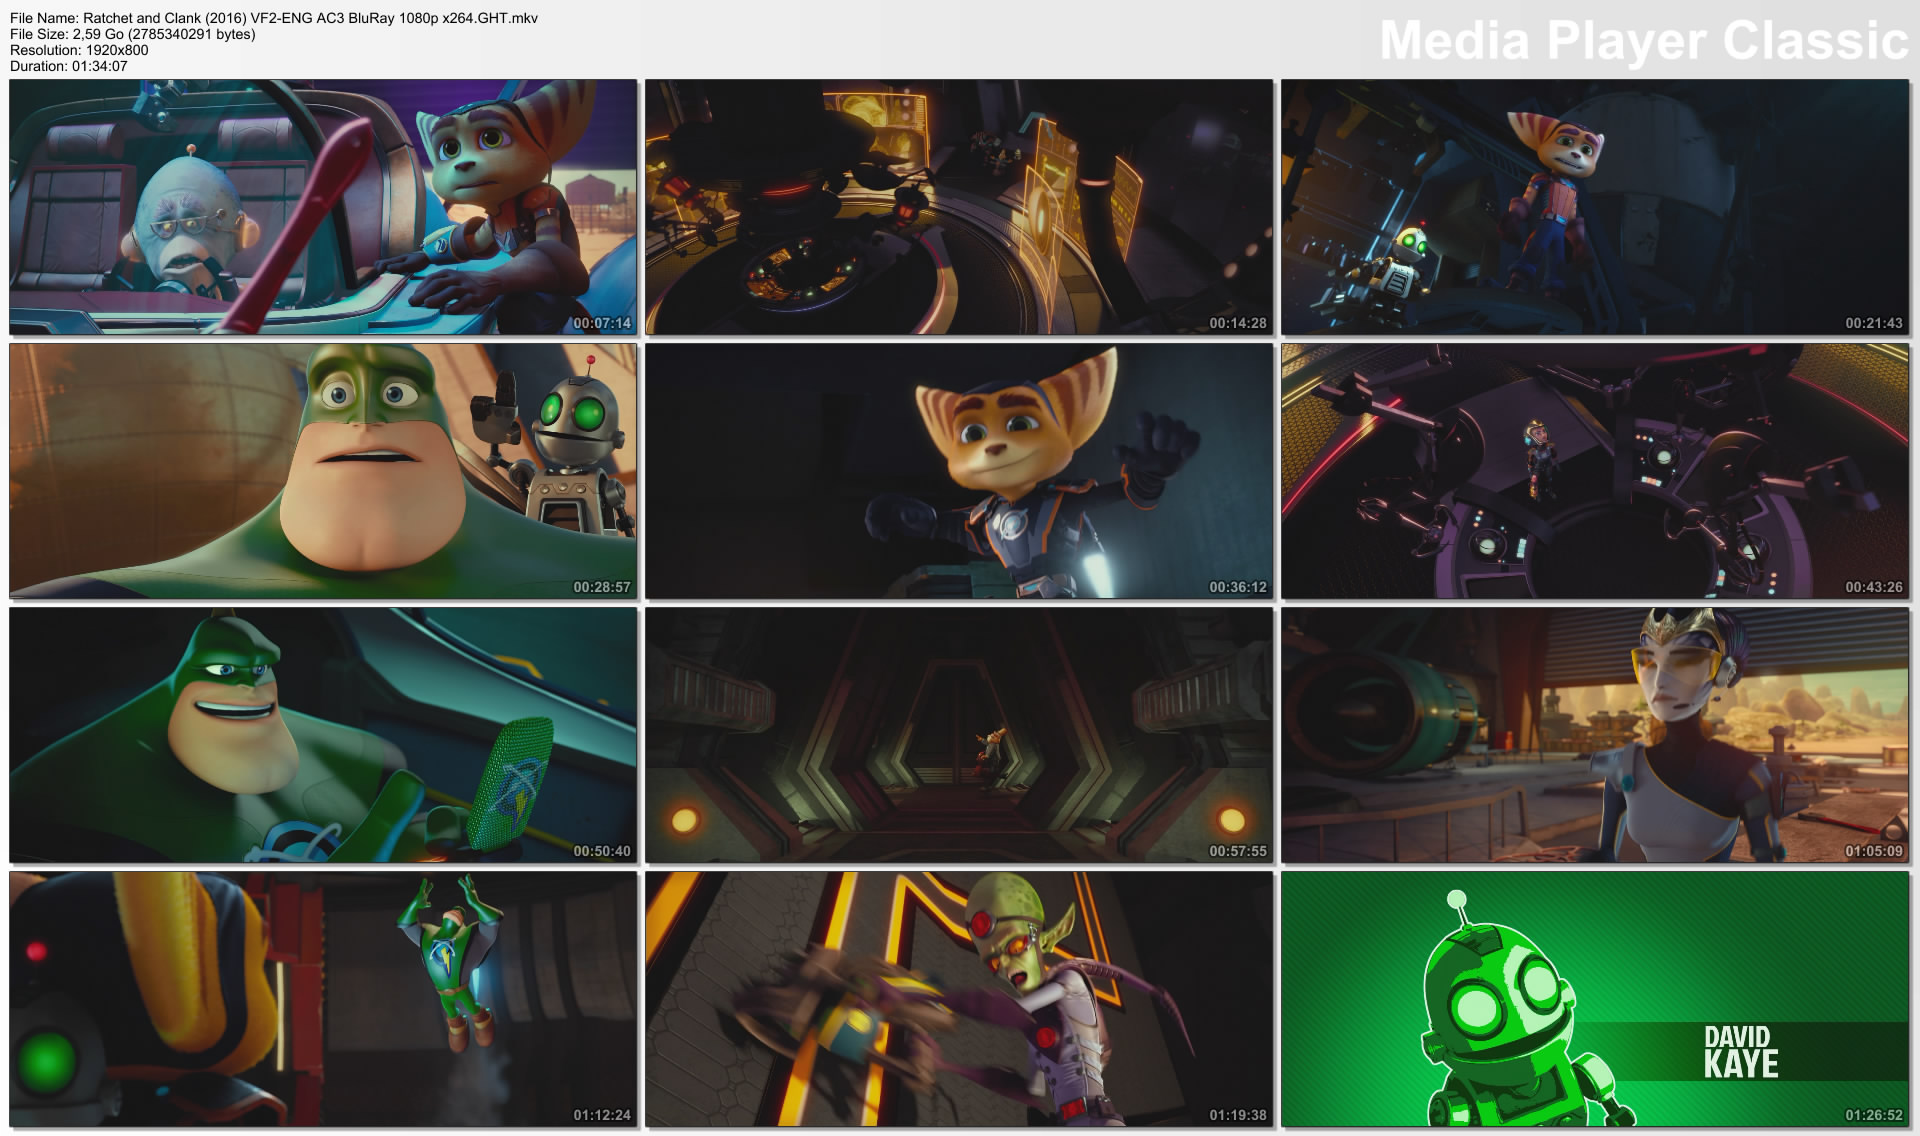 Ratchet and Clank (2016) VF2-ENG AC3 BluRay 1080p x264.GHT